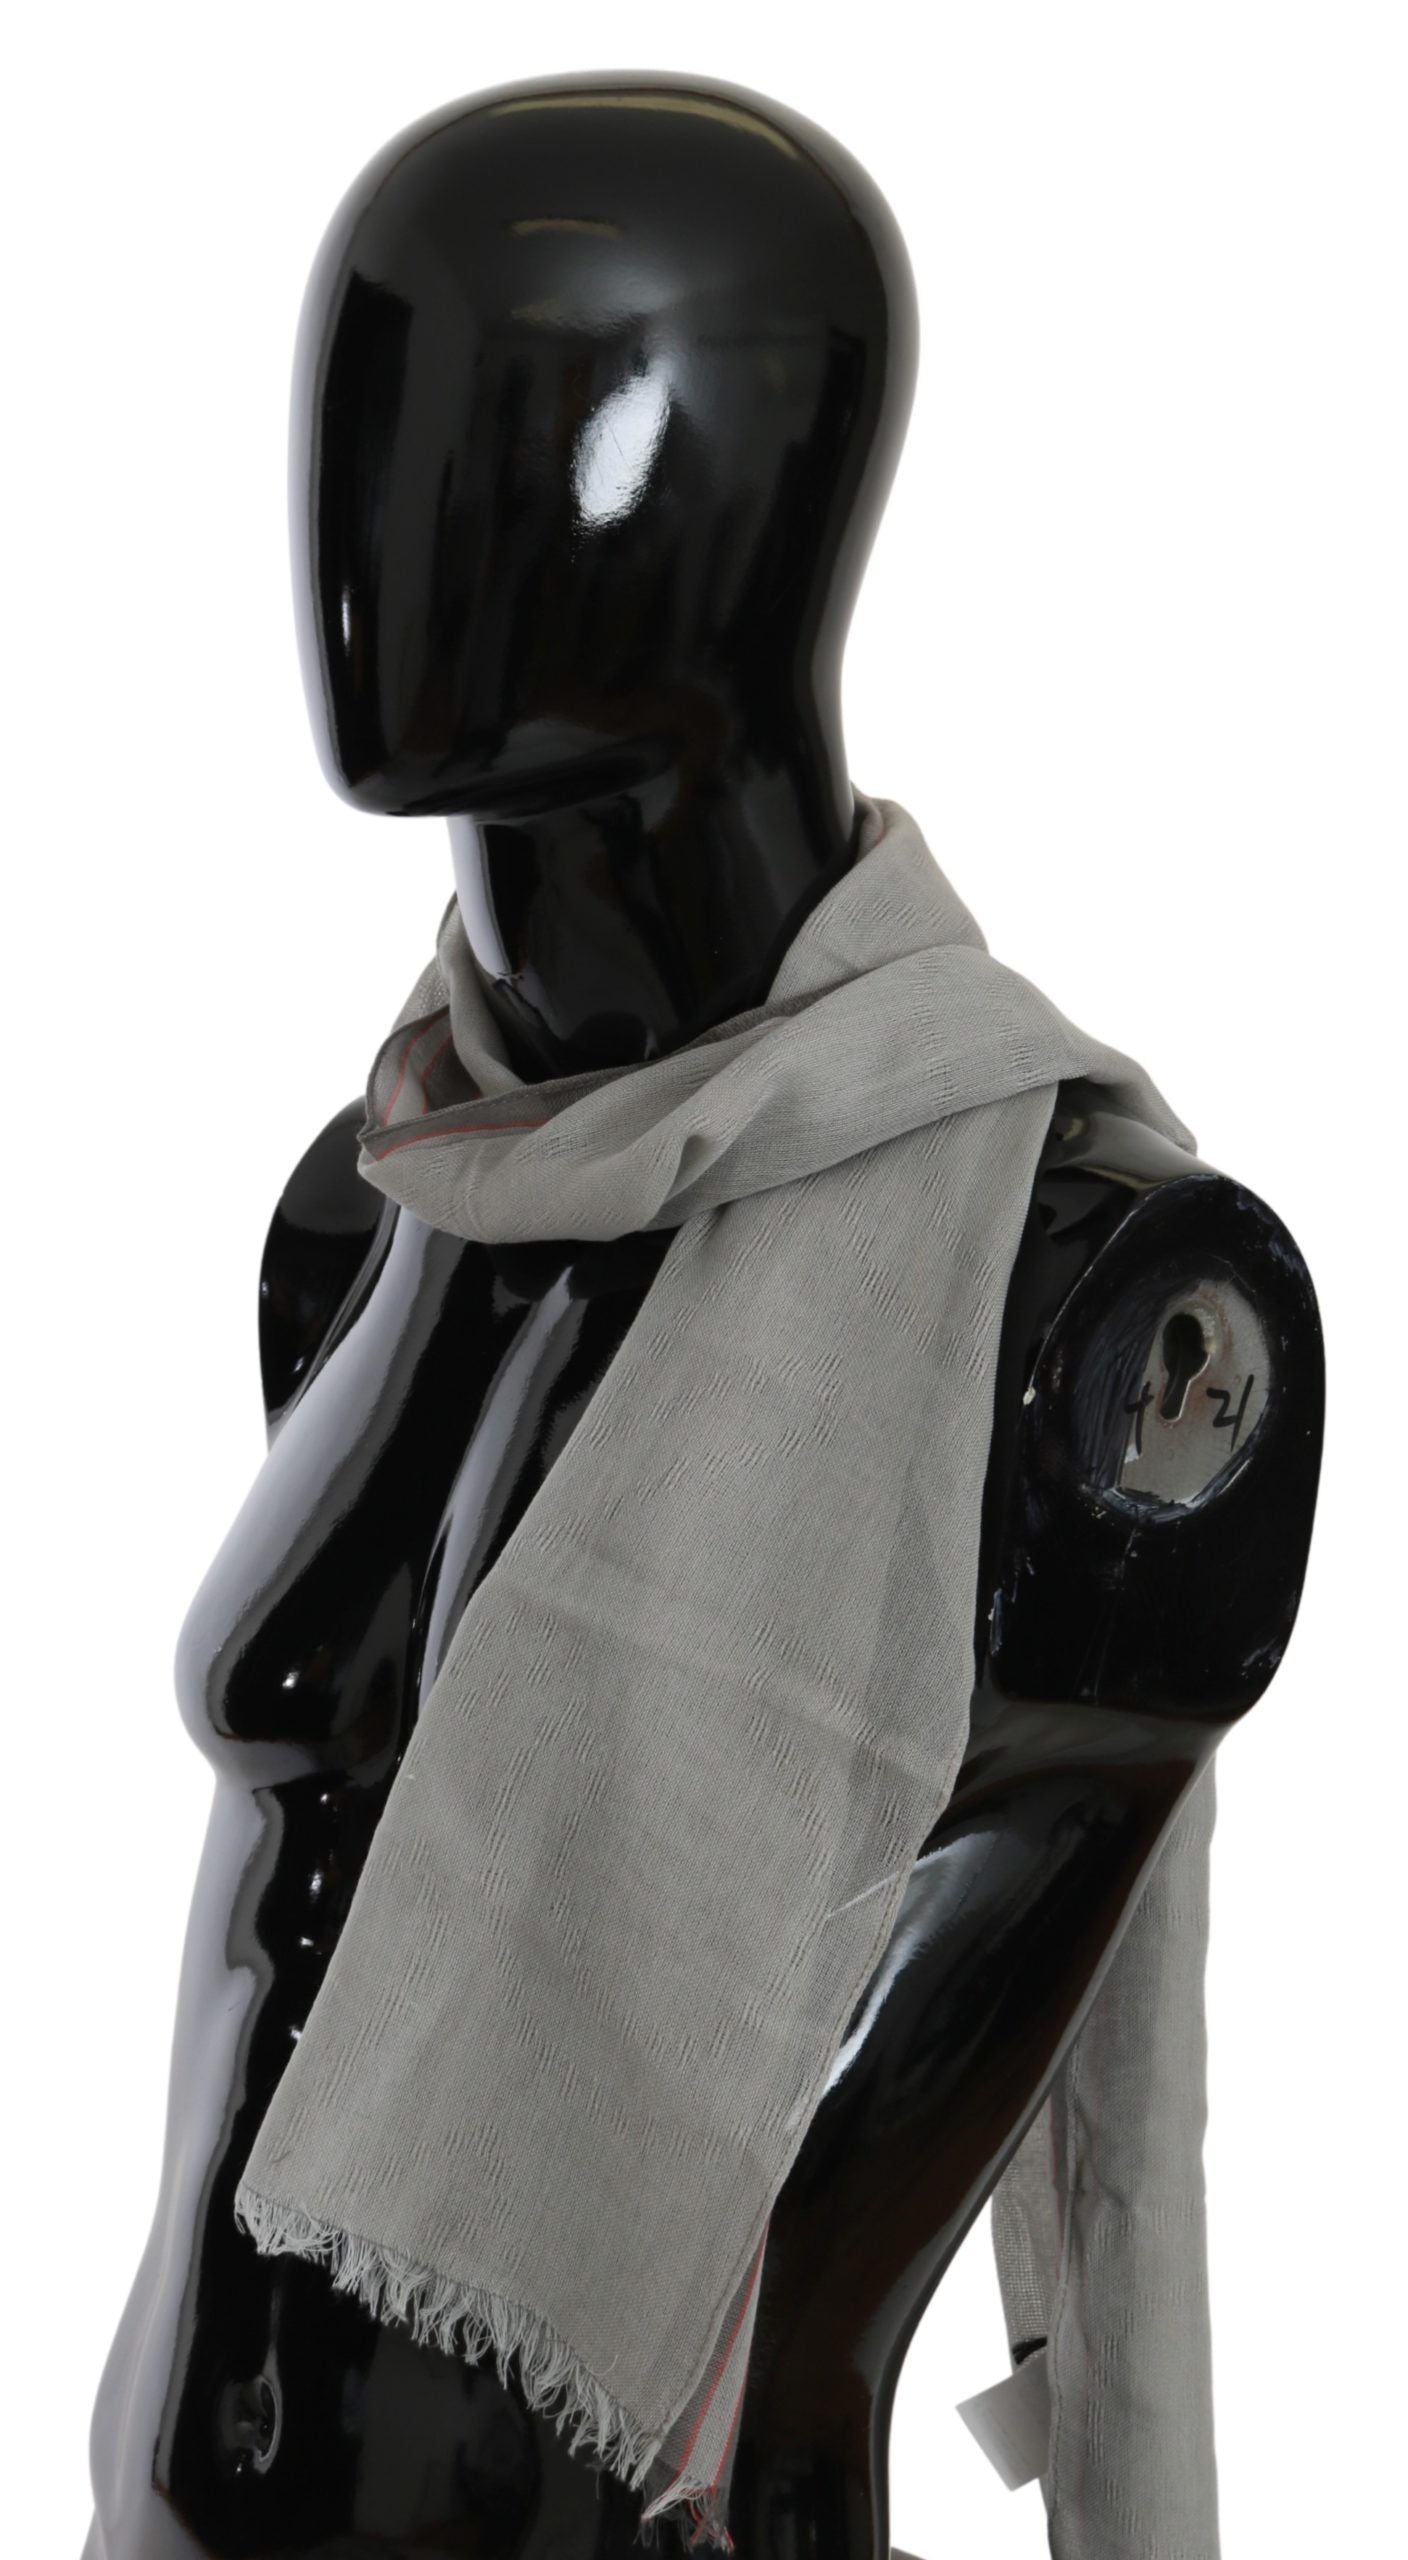 Costume National Grey Fringe Neck Wrap Cotton Scarf - Designed by Costume National Available to Buy at a Discounted Price on Moon Behind The Hill Online Designer Discount Store